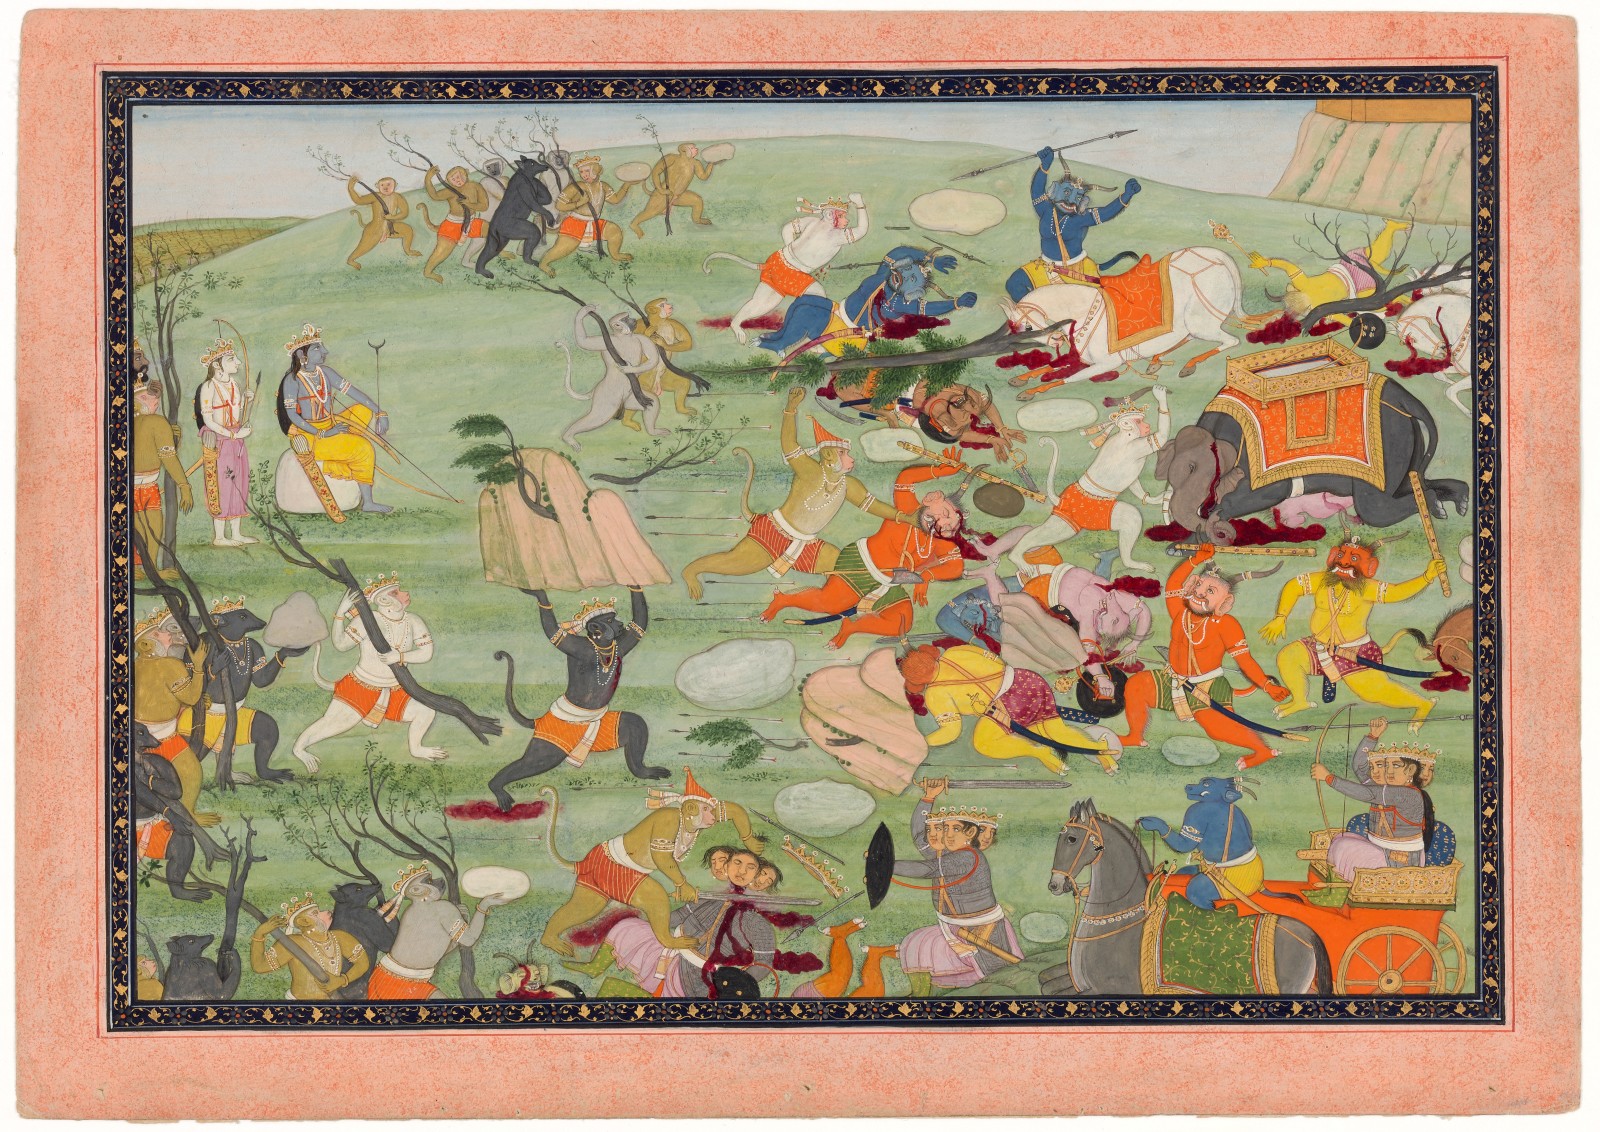 The death of the demons Mahodara, Devantaka and Trishiras; folio from the second part of the ‘Second Guler’ Ramayana, By a Guler artist, c. 1790